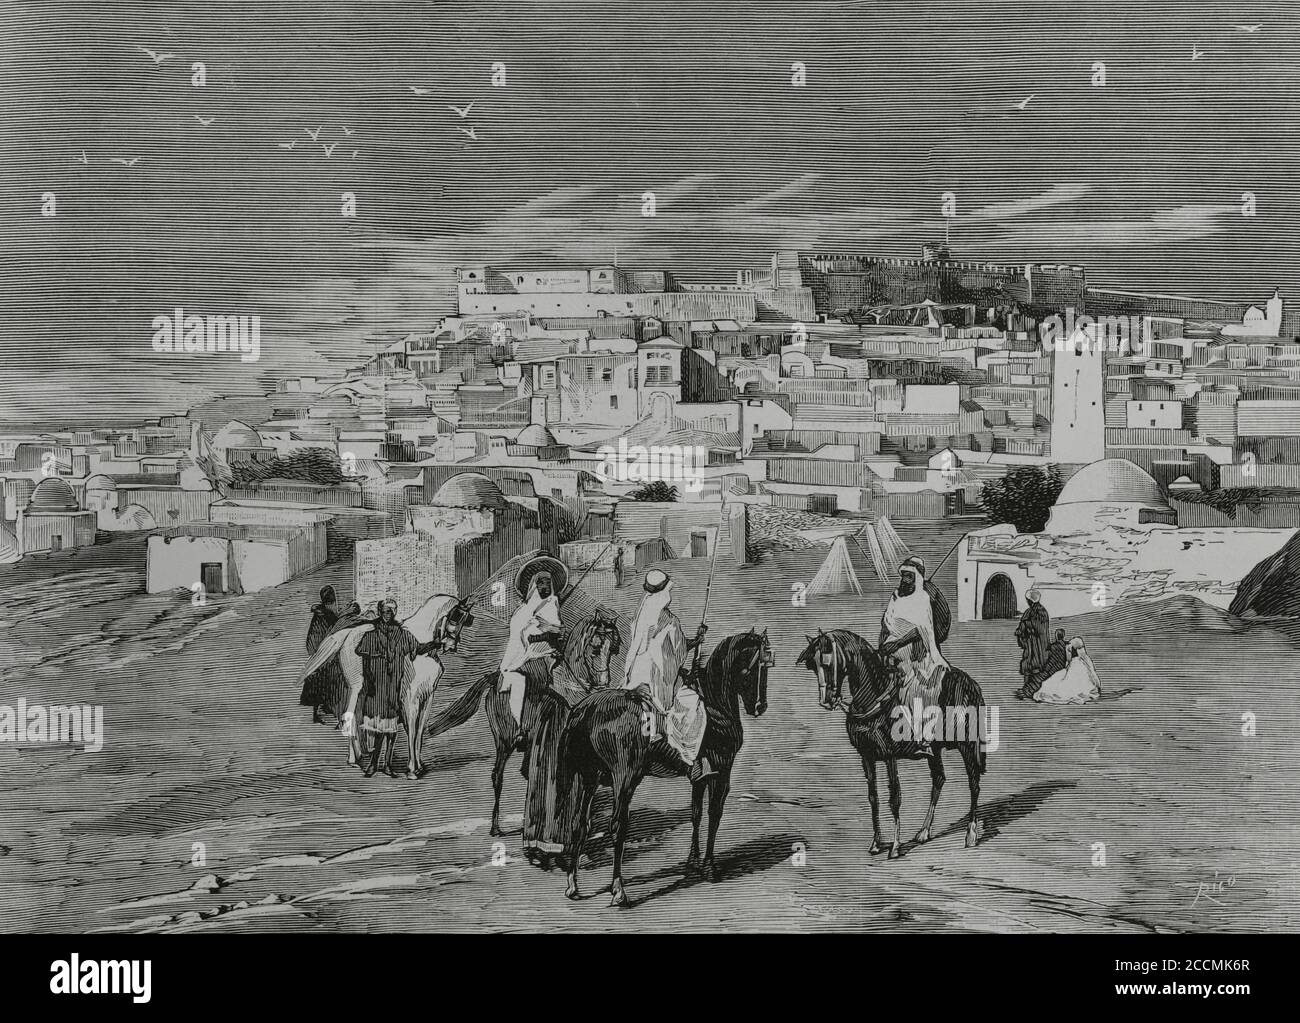 Entry of the French army into Tunisian territory. Finding very little resistance, it was proclaimed the French Protectorate of Tunis from May 12, 1881 to March 20, 1956. View of Le Kef. Holy city of the Tunisians, occupied by the column of the French general Logerot, on April 26, 1881. Engraving by Bernardo Rico (1825-1894). La Ilustracion Española y Americana, 1881. Stock Photo